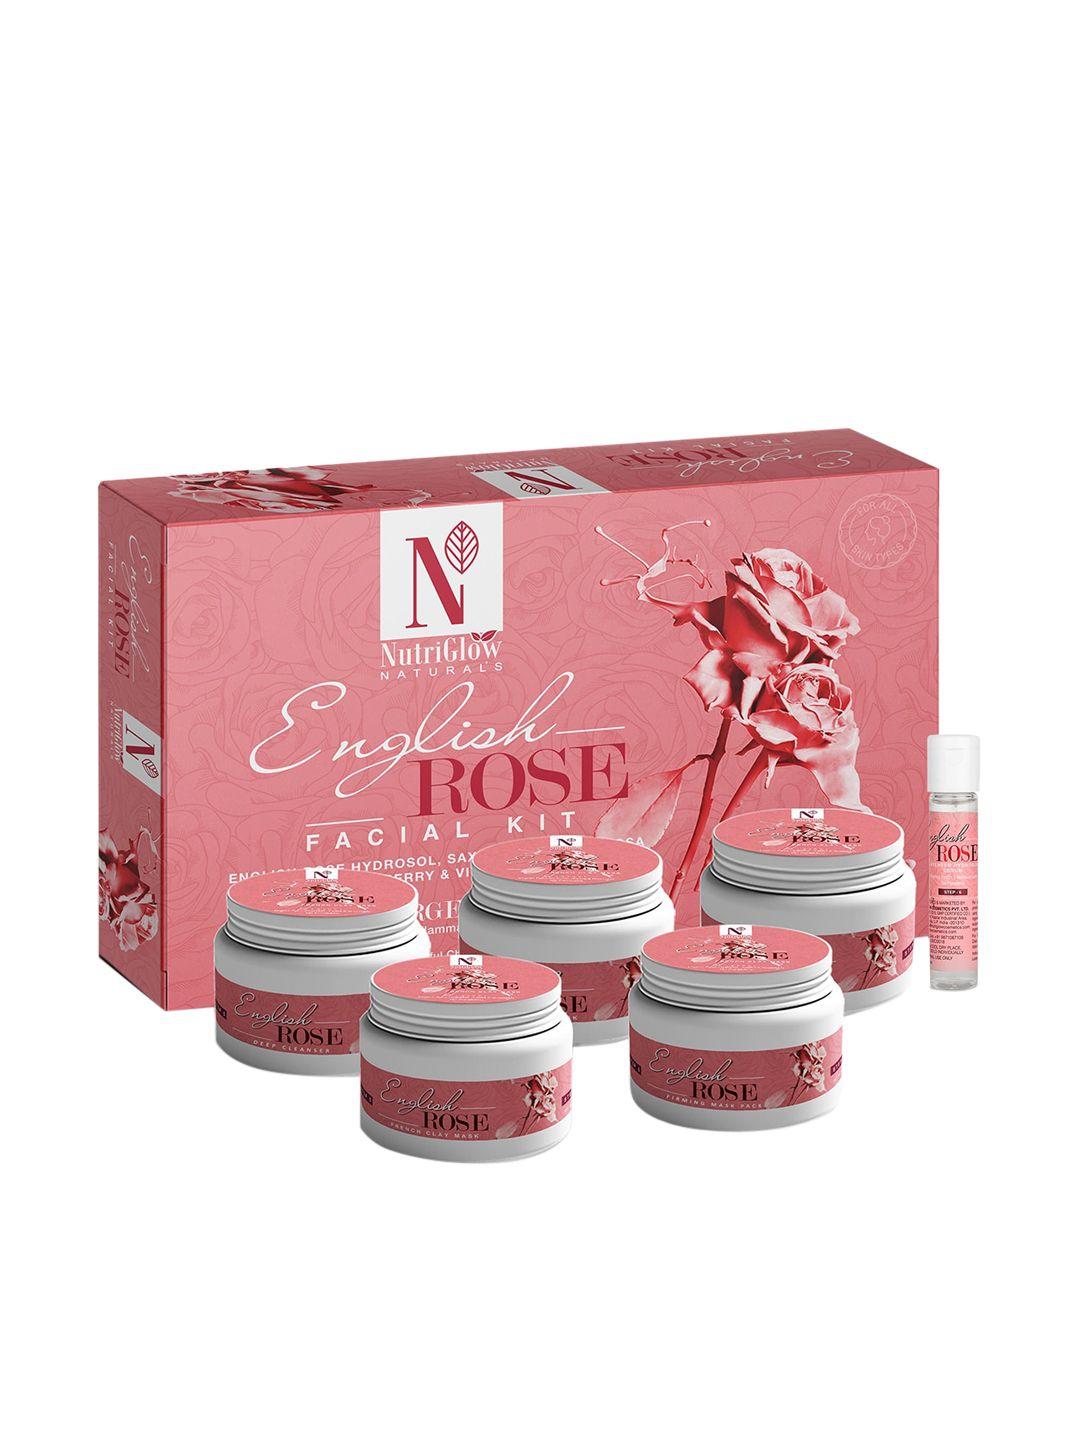 nutriglow sustainable natural english rose facial kit all skin types - 250g+10ml